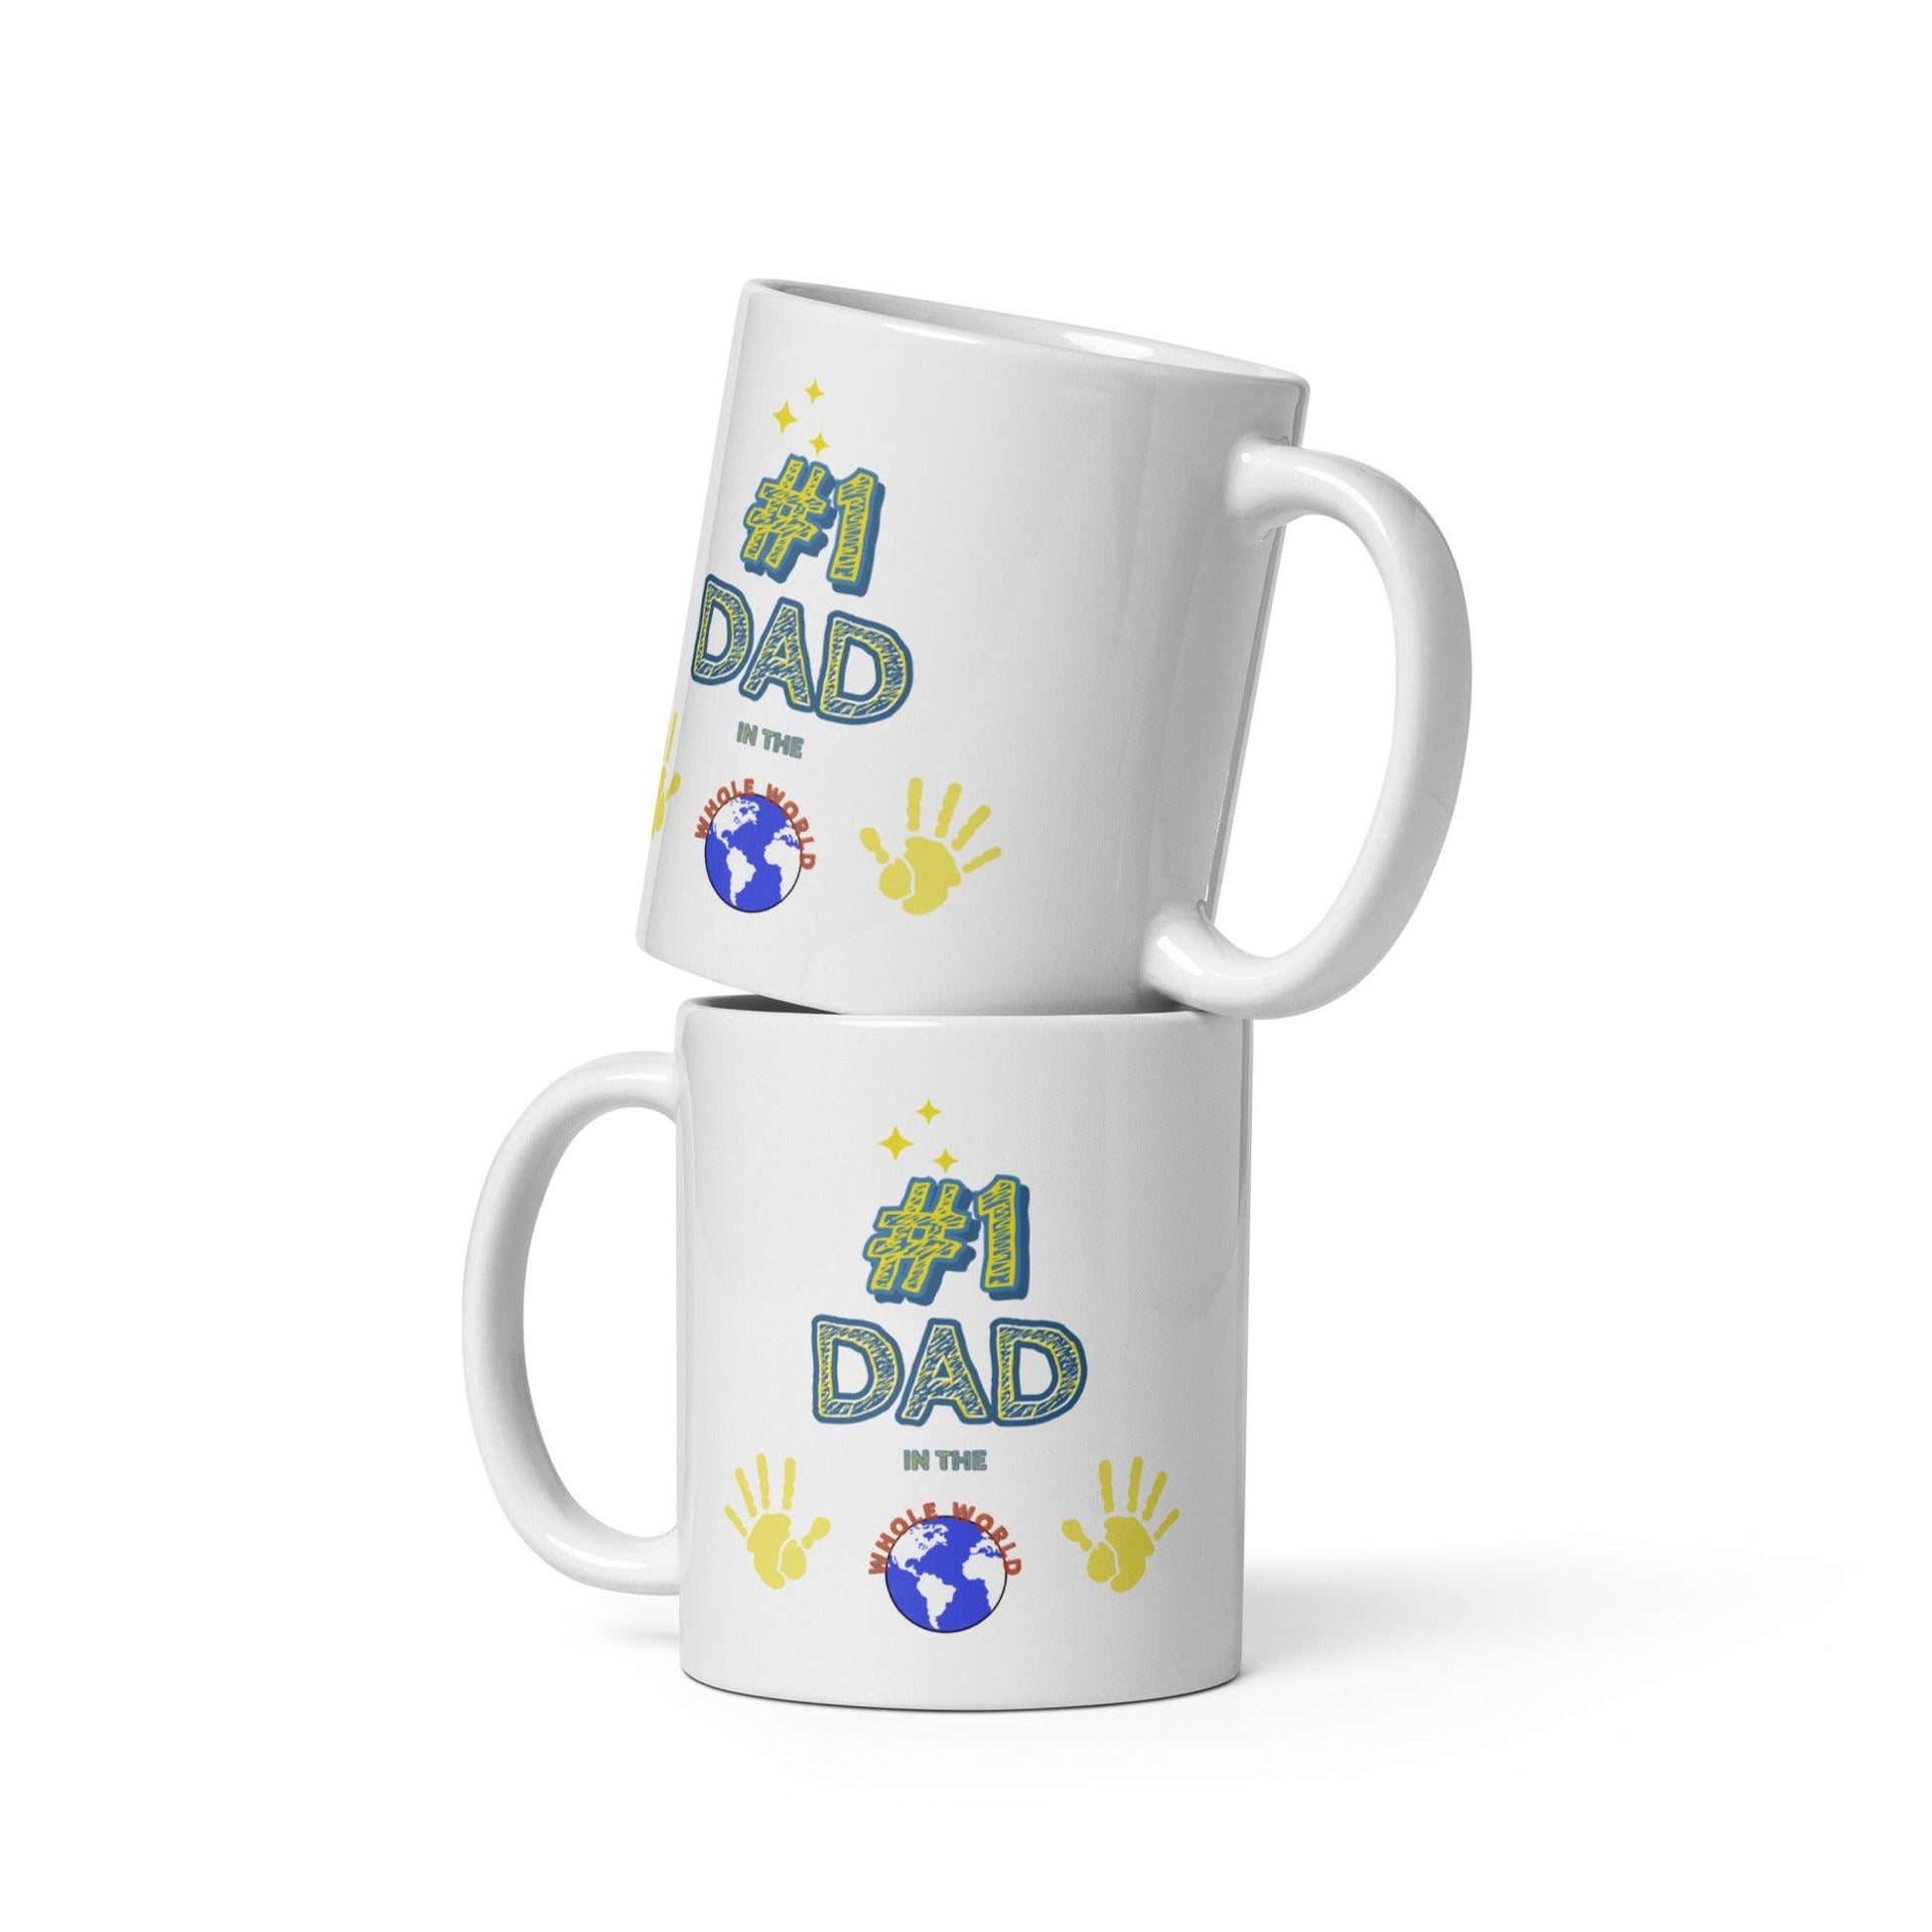 '#1 DAD IN THE WORLD' Glossy Mug Gift - Clover Collection Shop